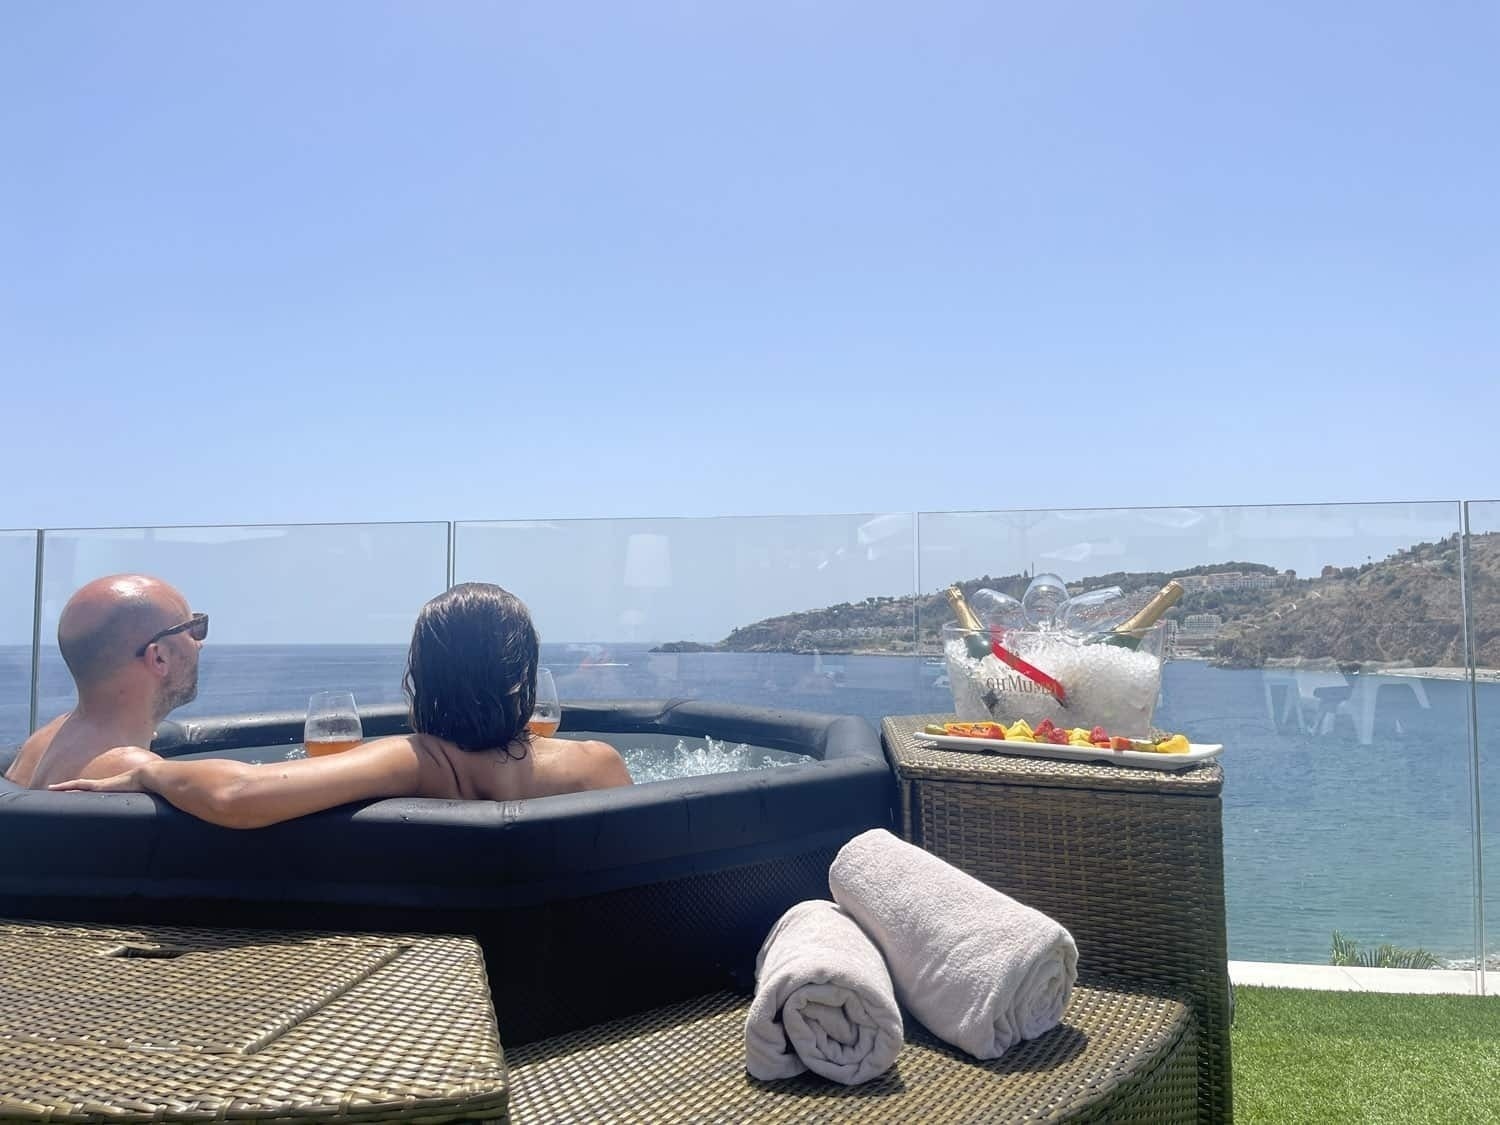 a man and a woman sit in a hot tub overlooking the ocean